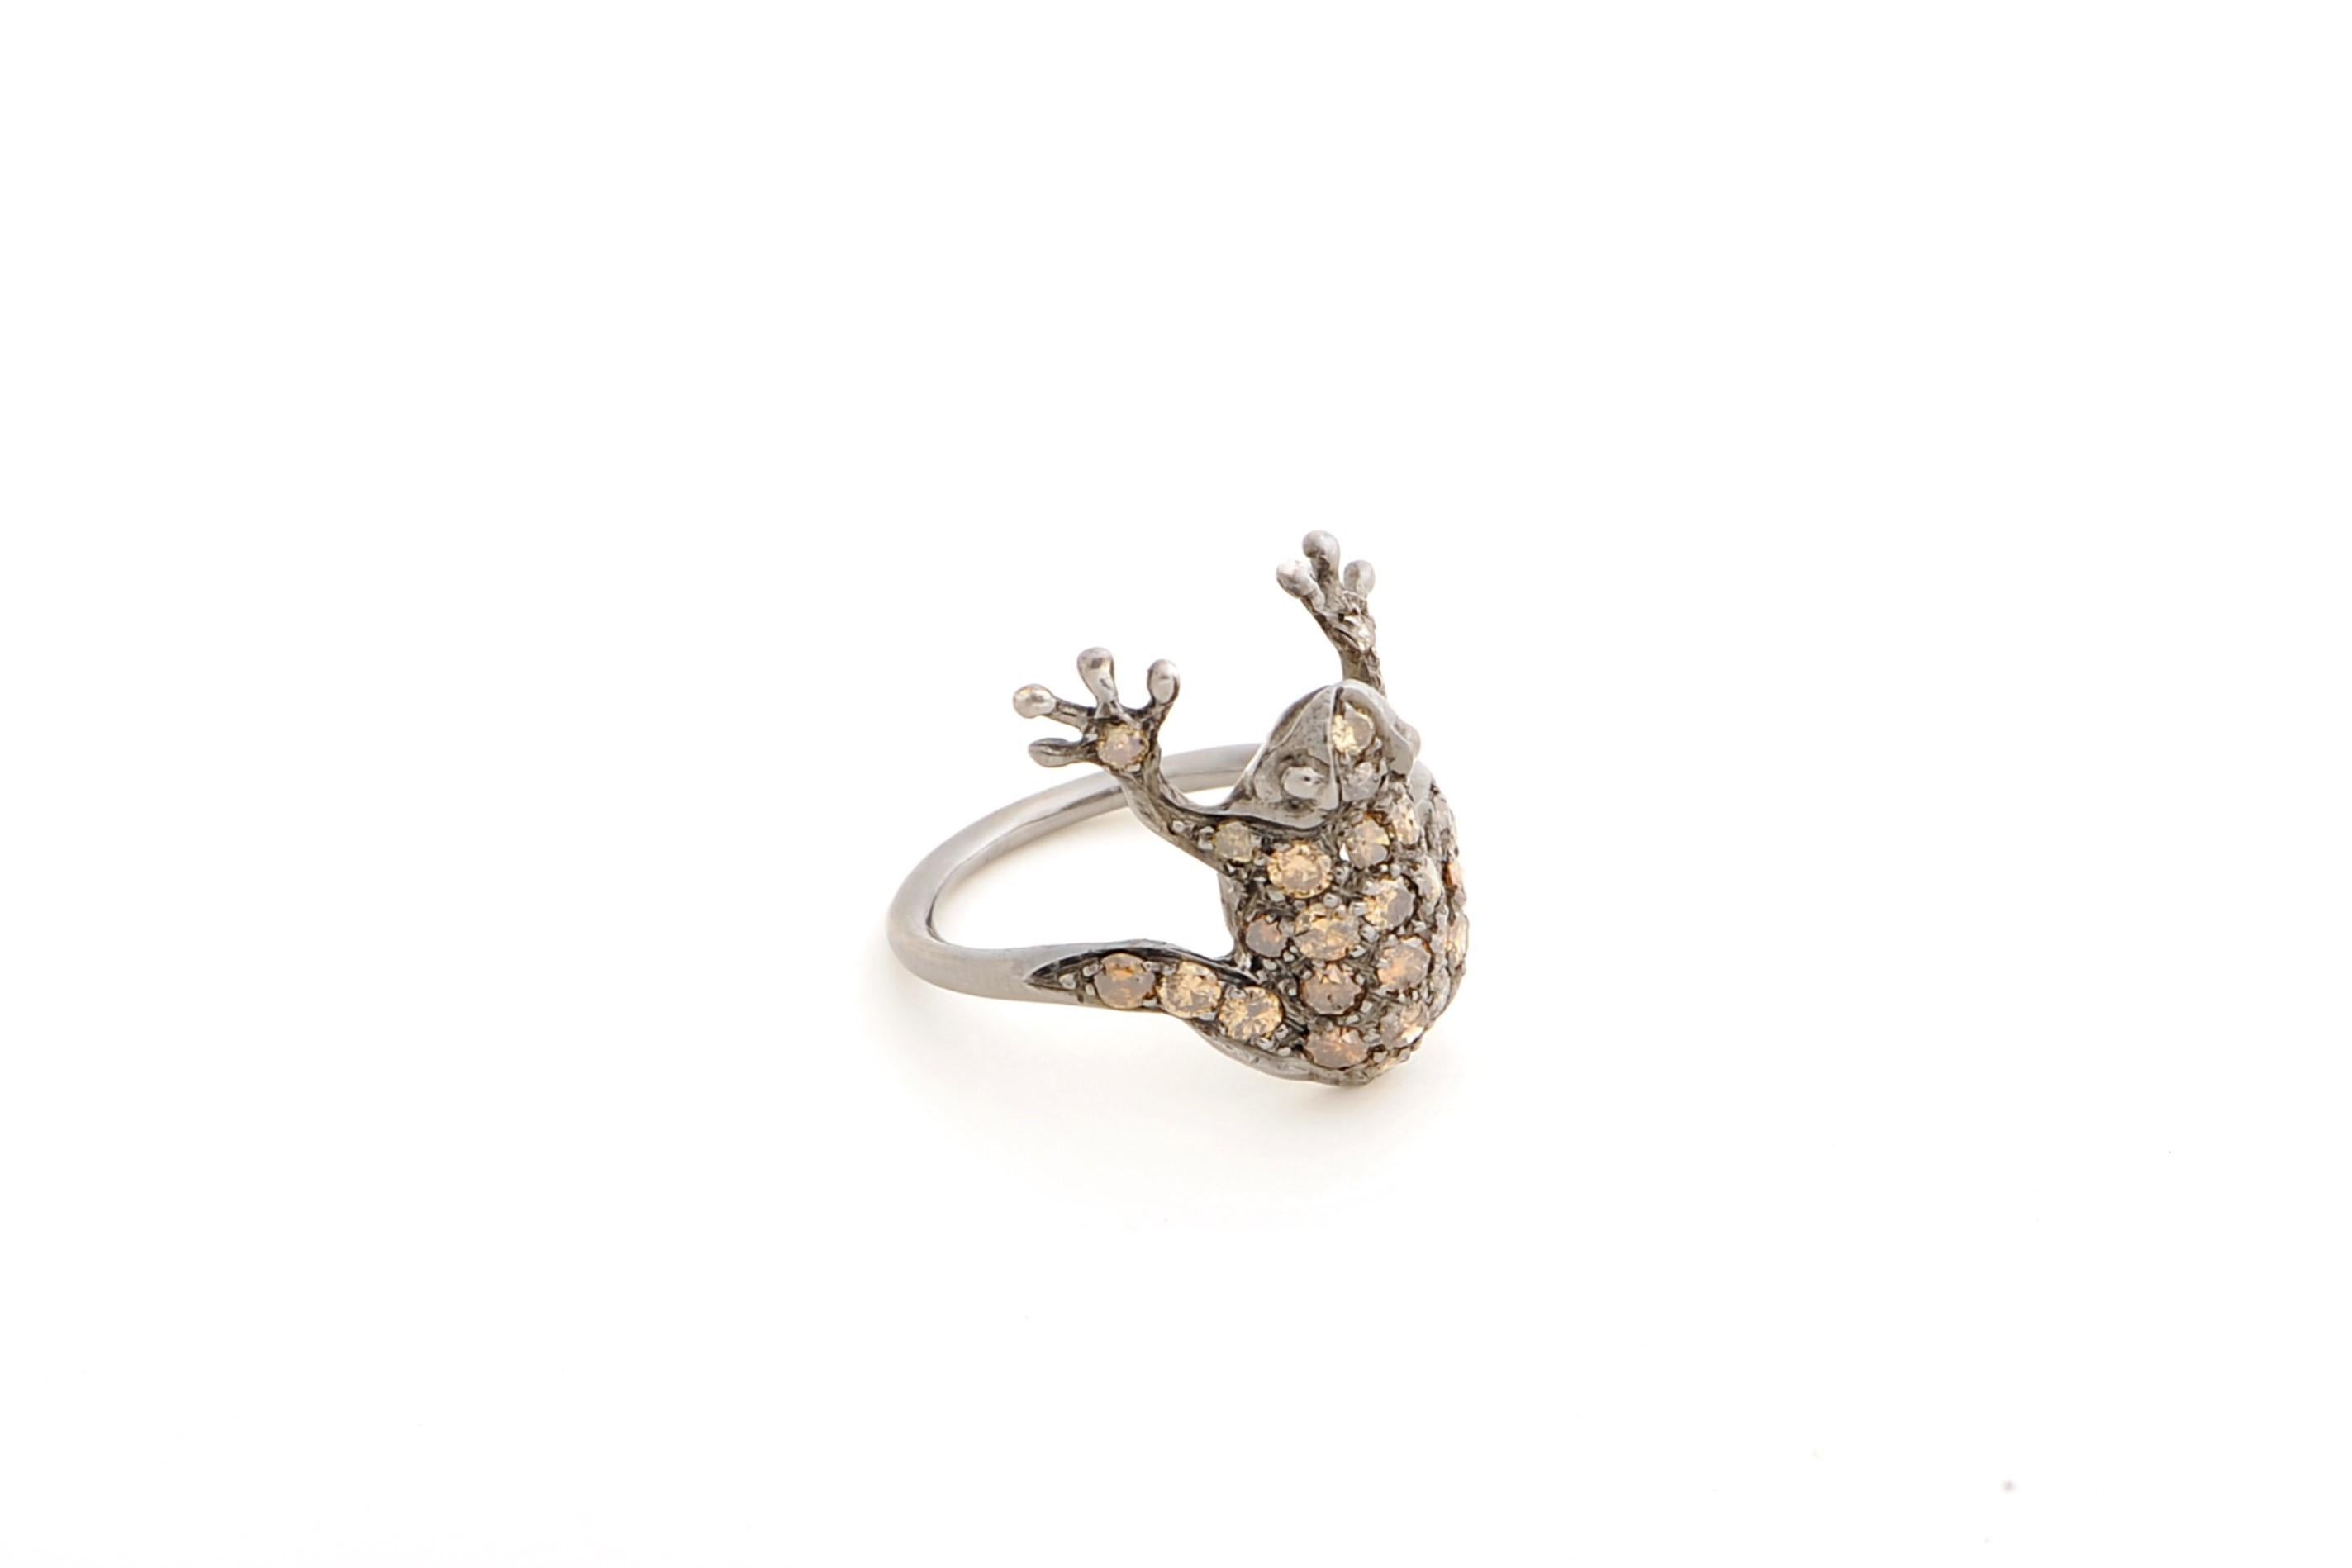  1.05 Karats Brown Diamonds 18 Karats White Gold Frog Contemporary Design Ring For Sale 2